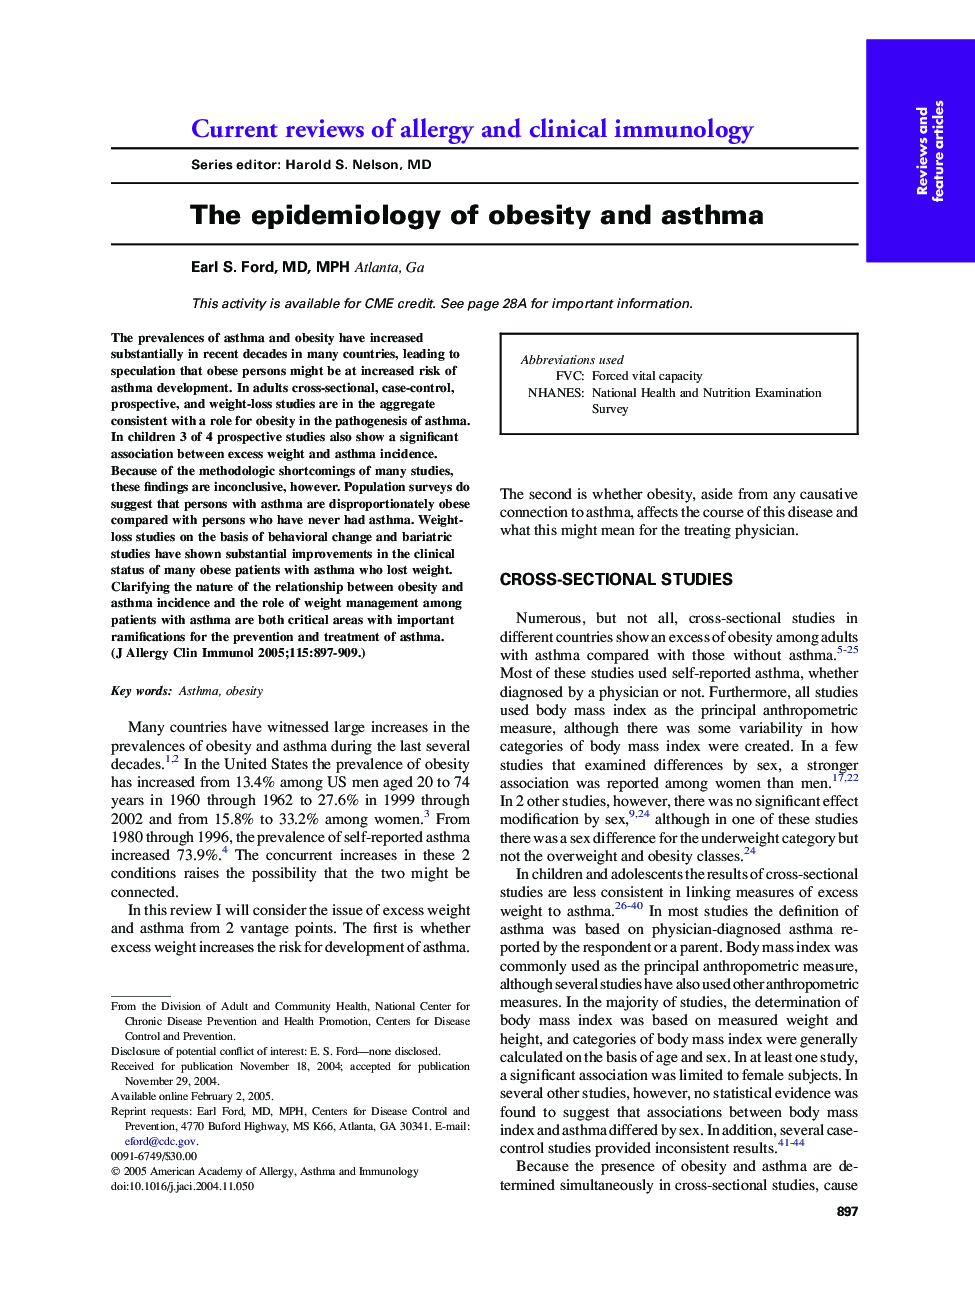 The epidemiology of obesity and asthma